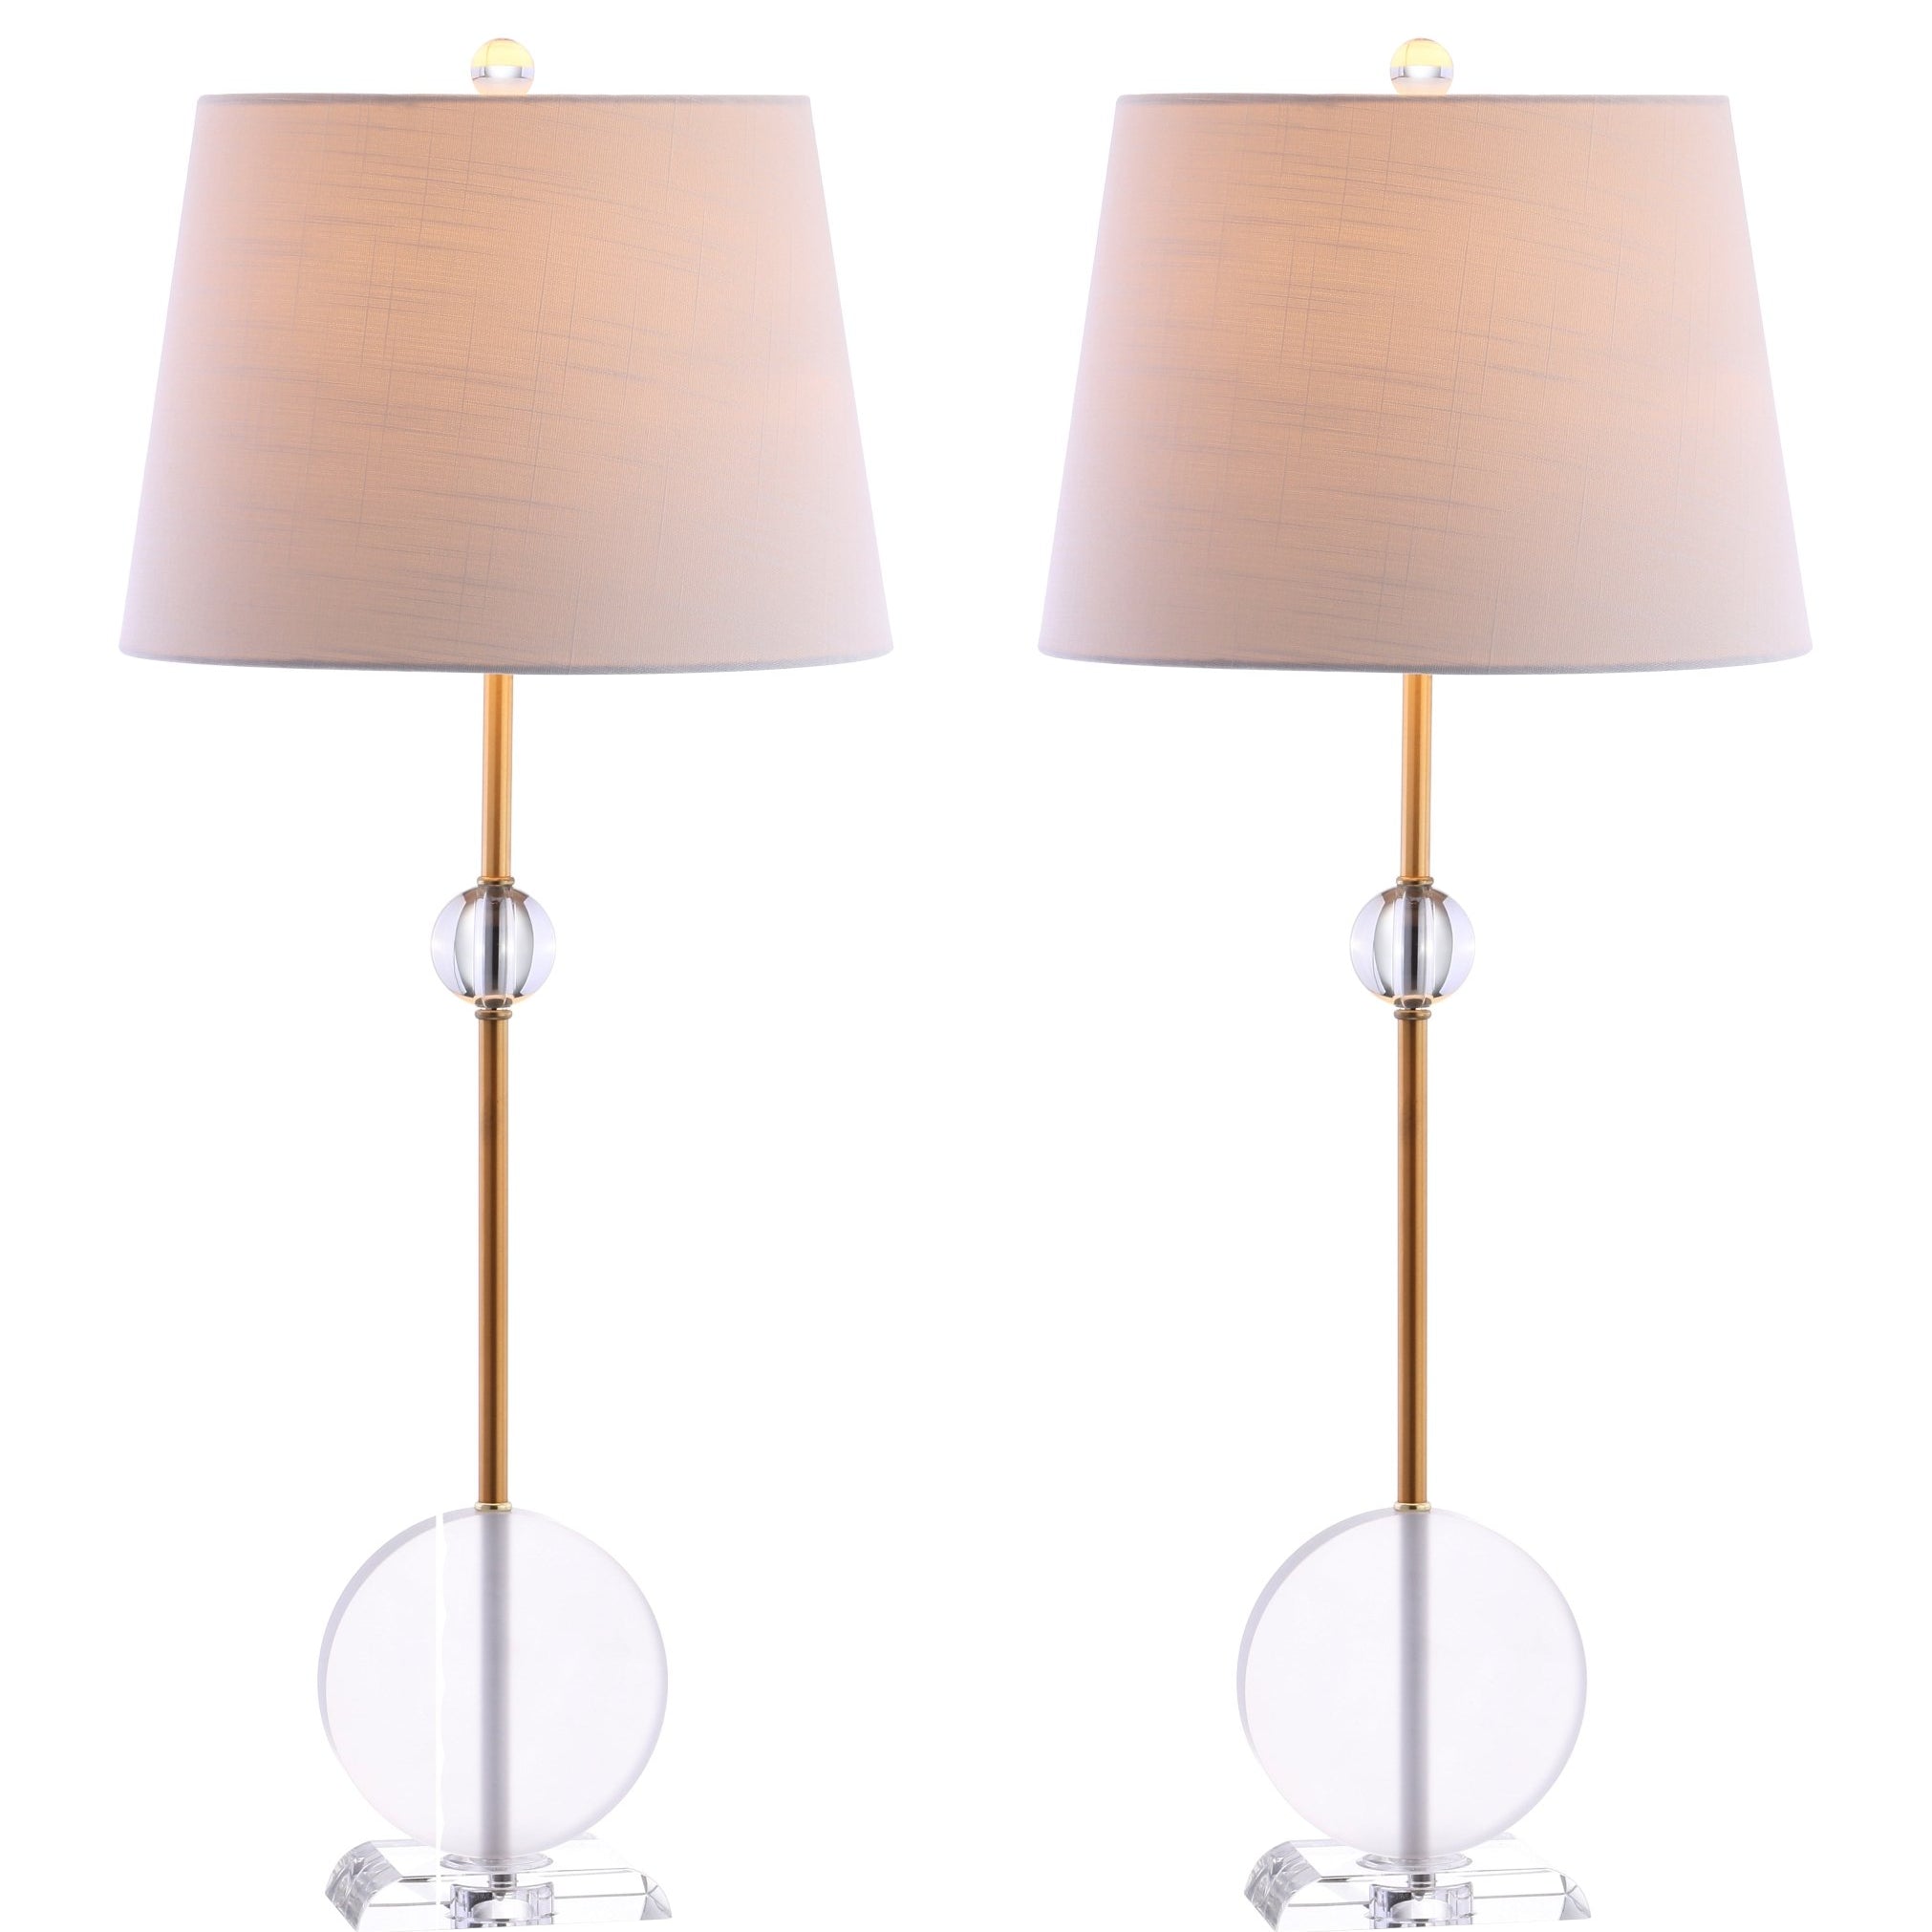 Spencer Crystal/Metal LED Table Lamp - Table Lamps